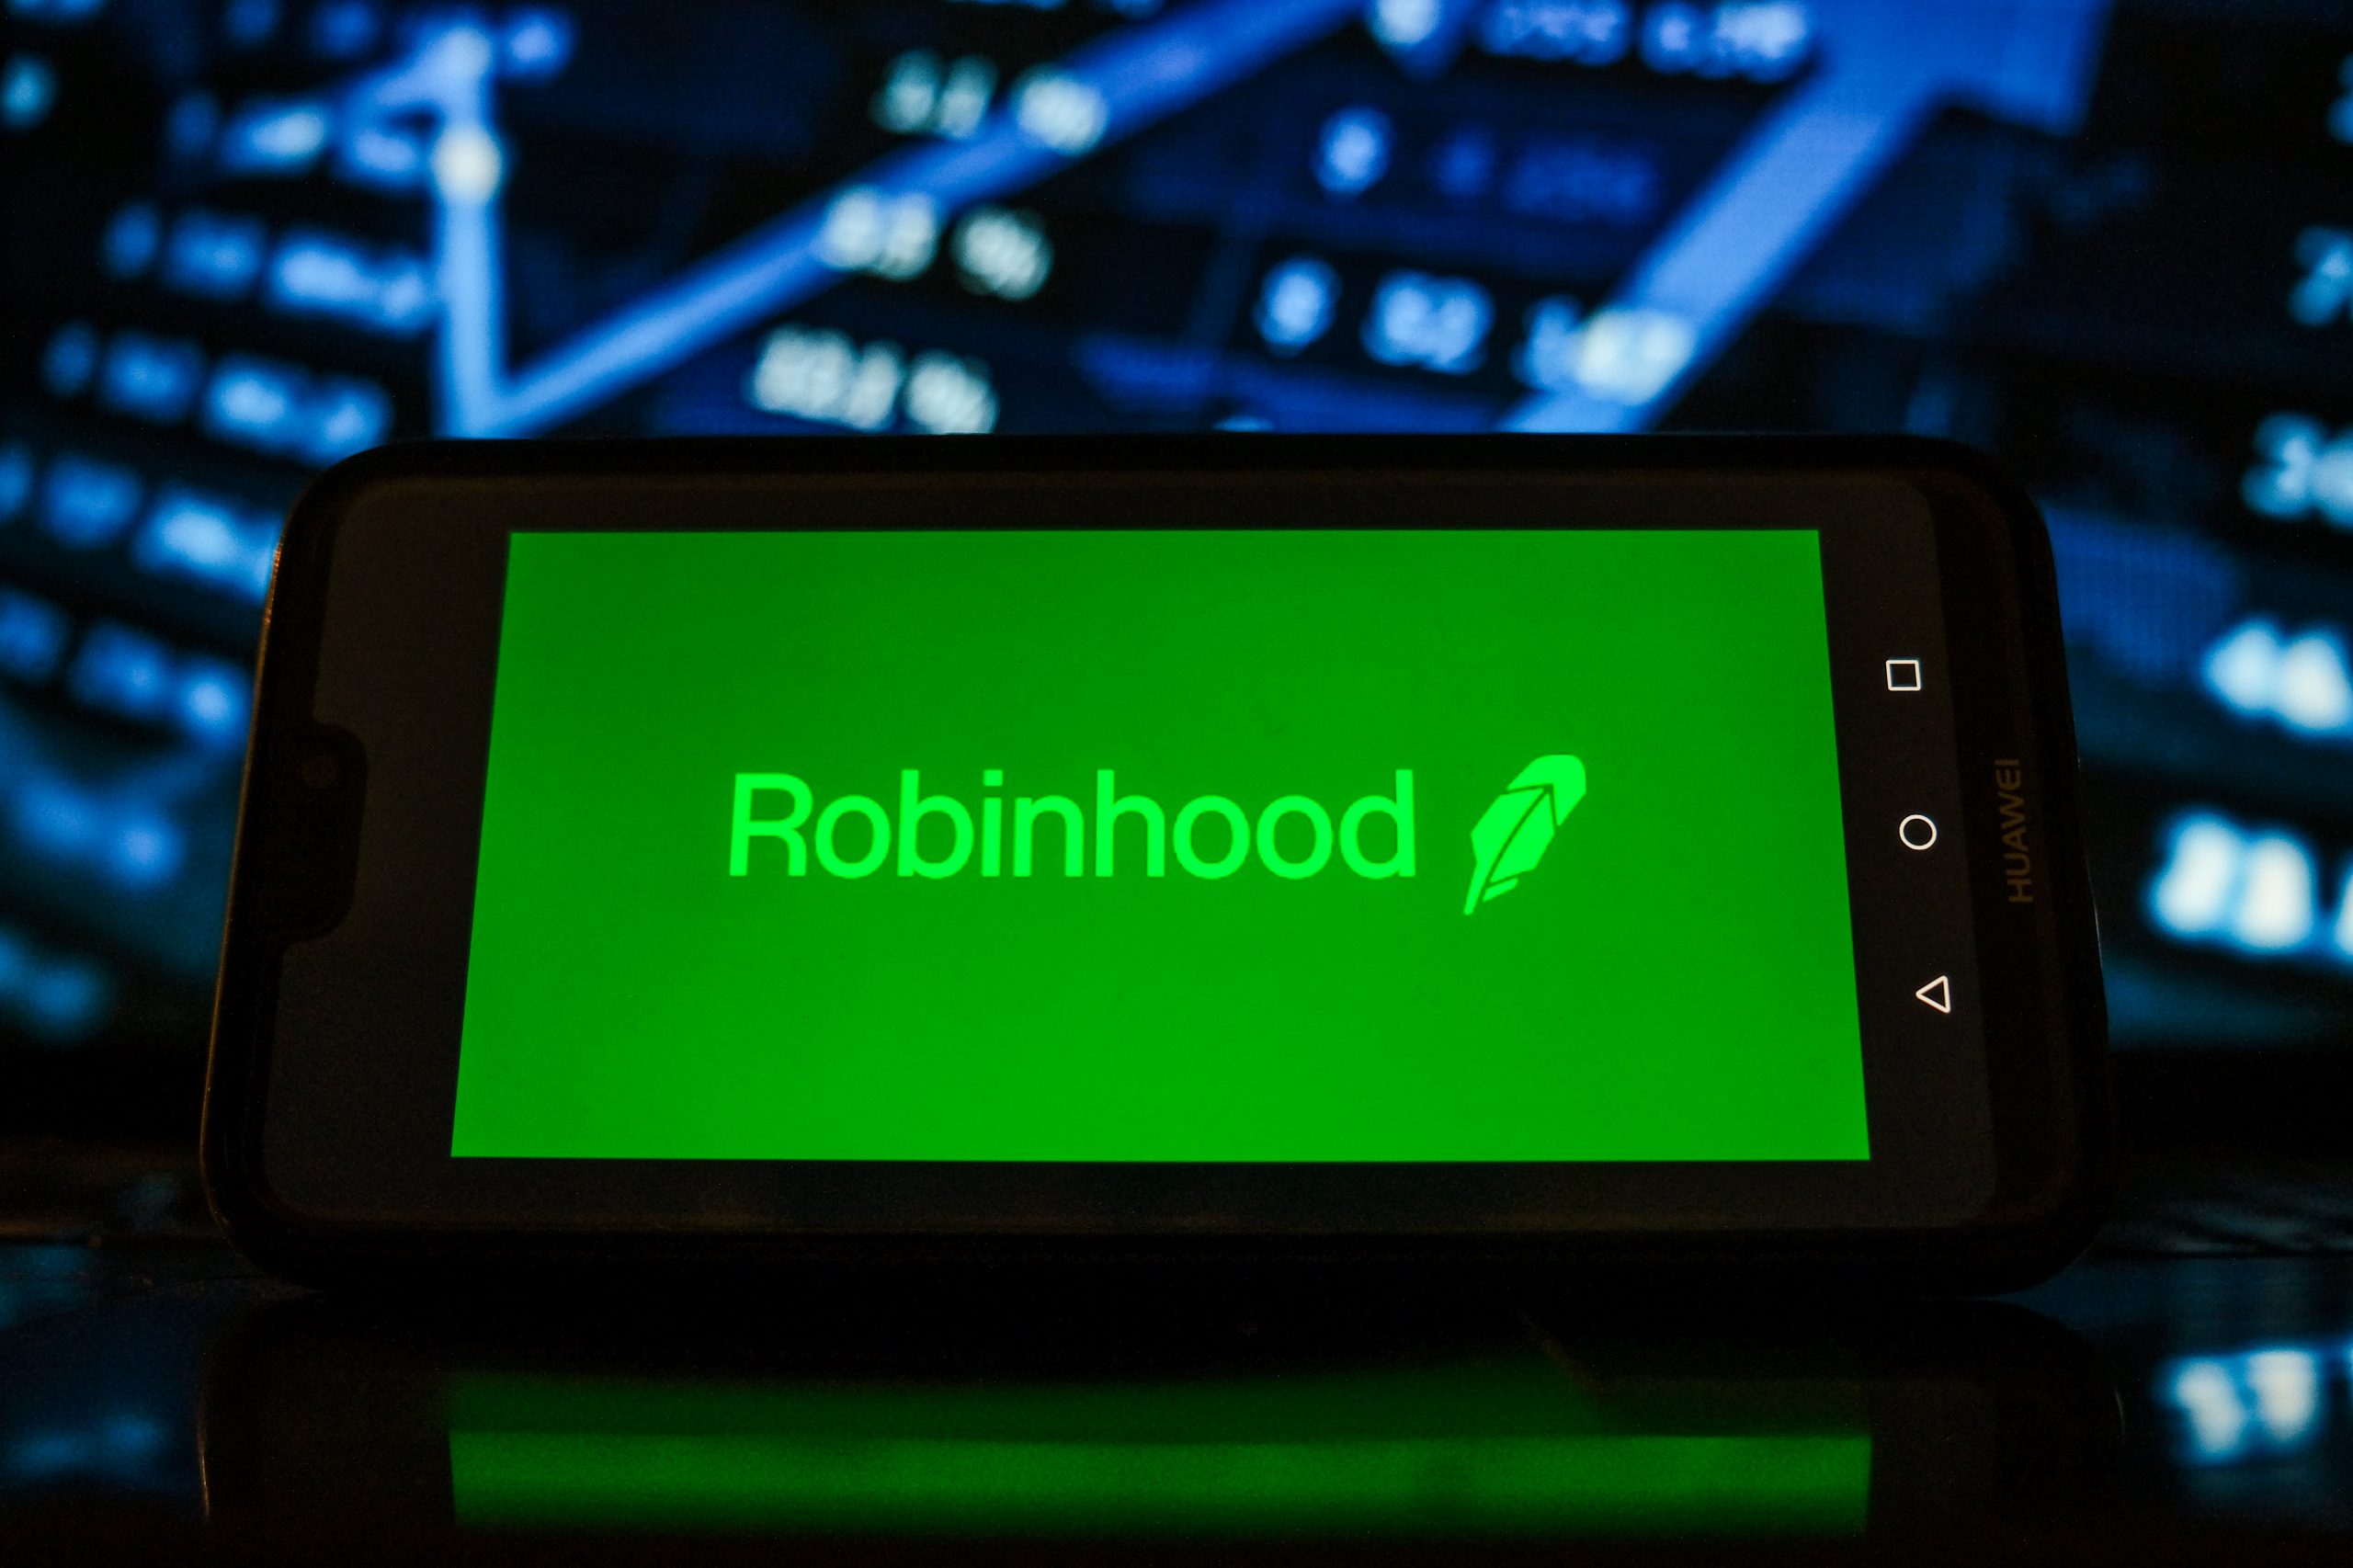 Listed here are the highlights from Robinhood’s digital roadshow